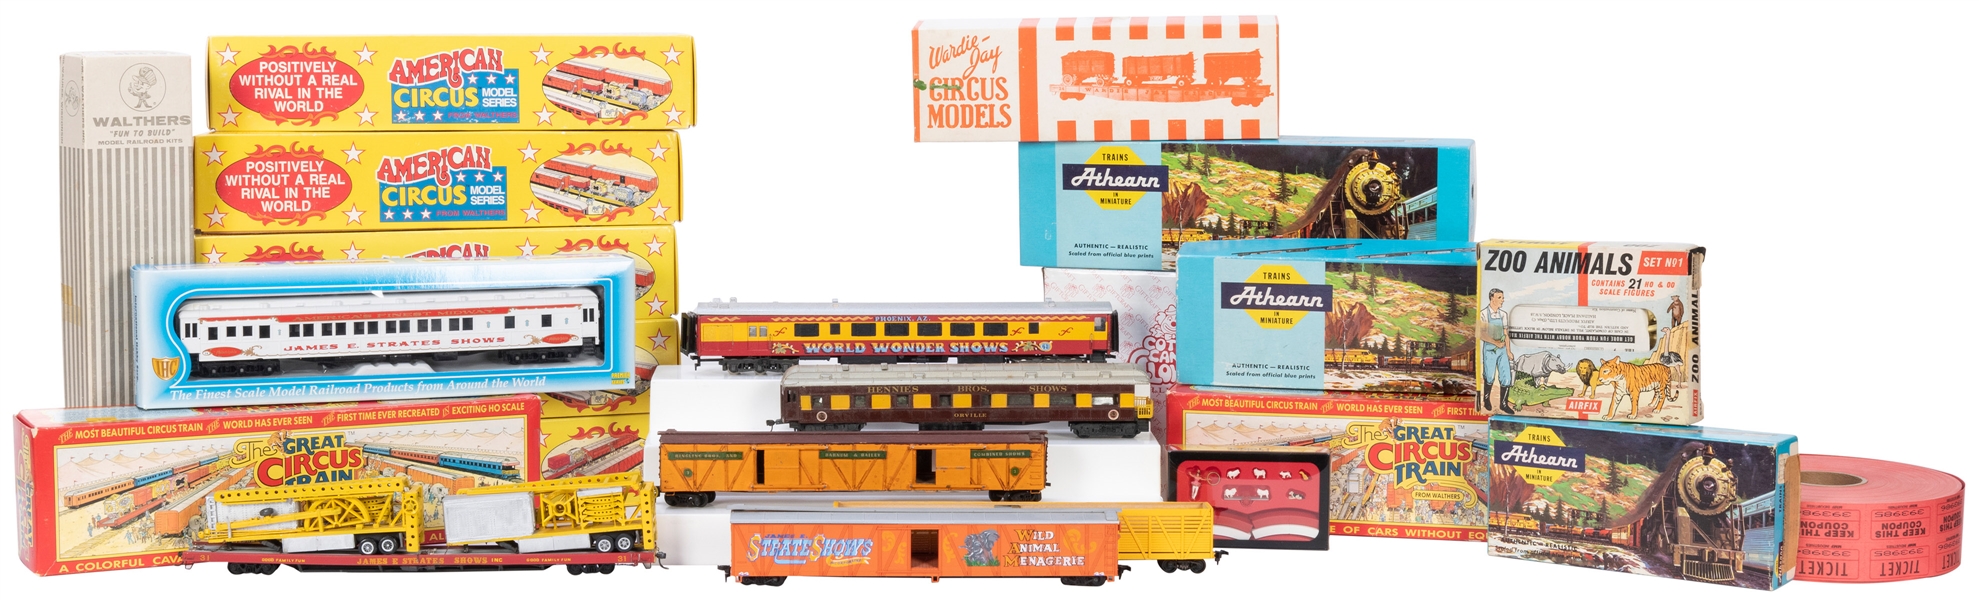  Collection of Circus and Carnival Scale Railroad Models and...